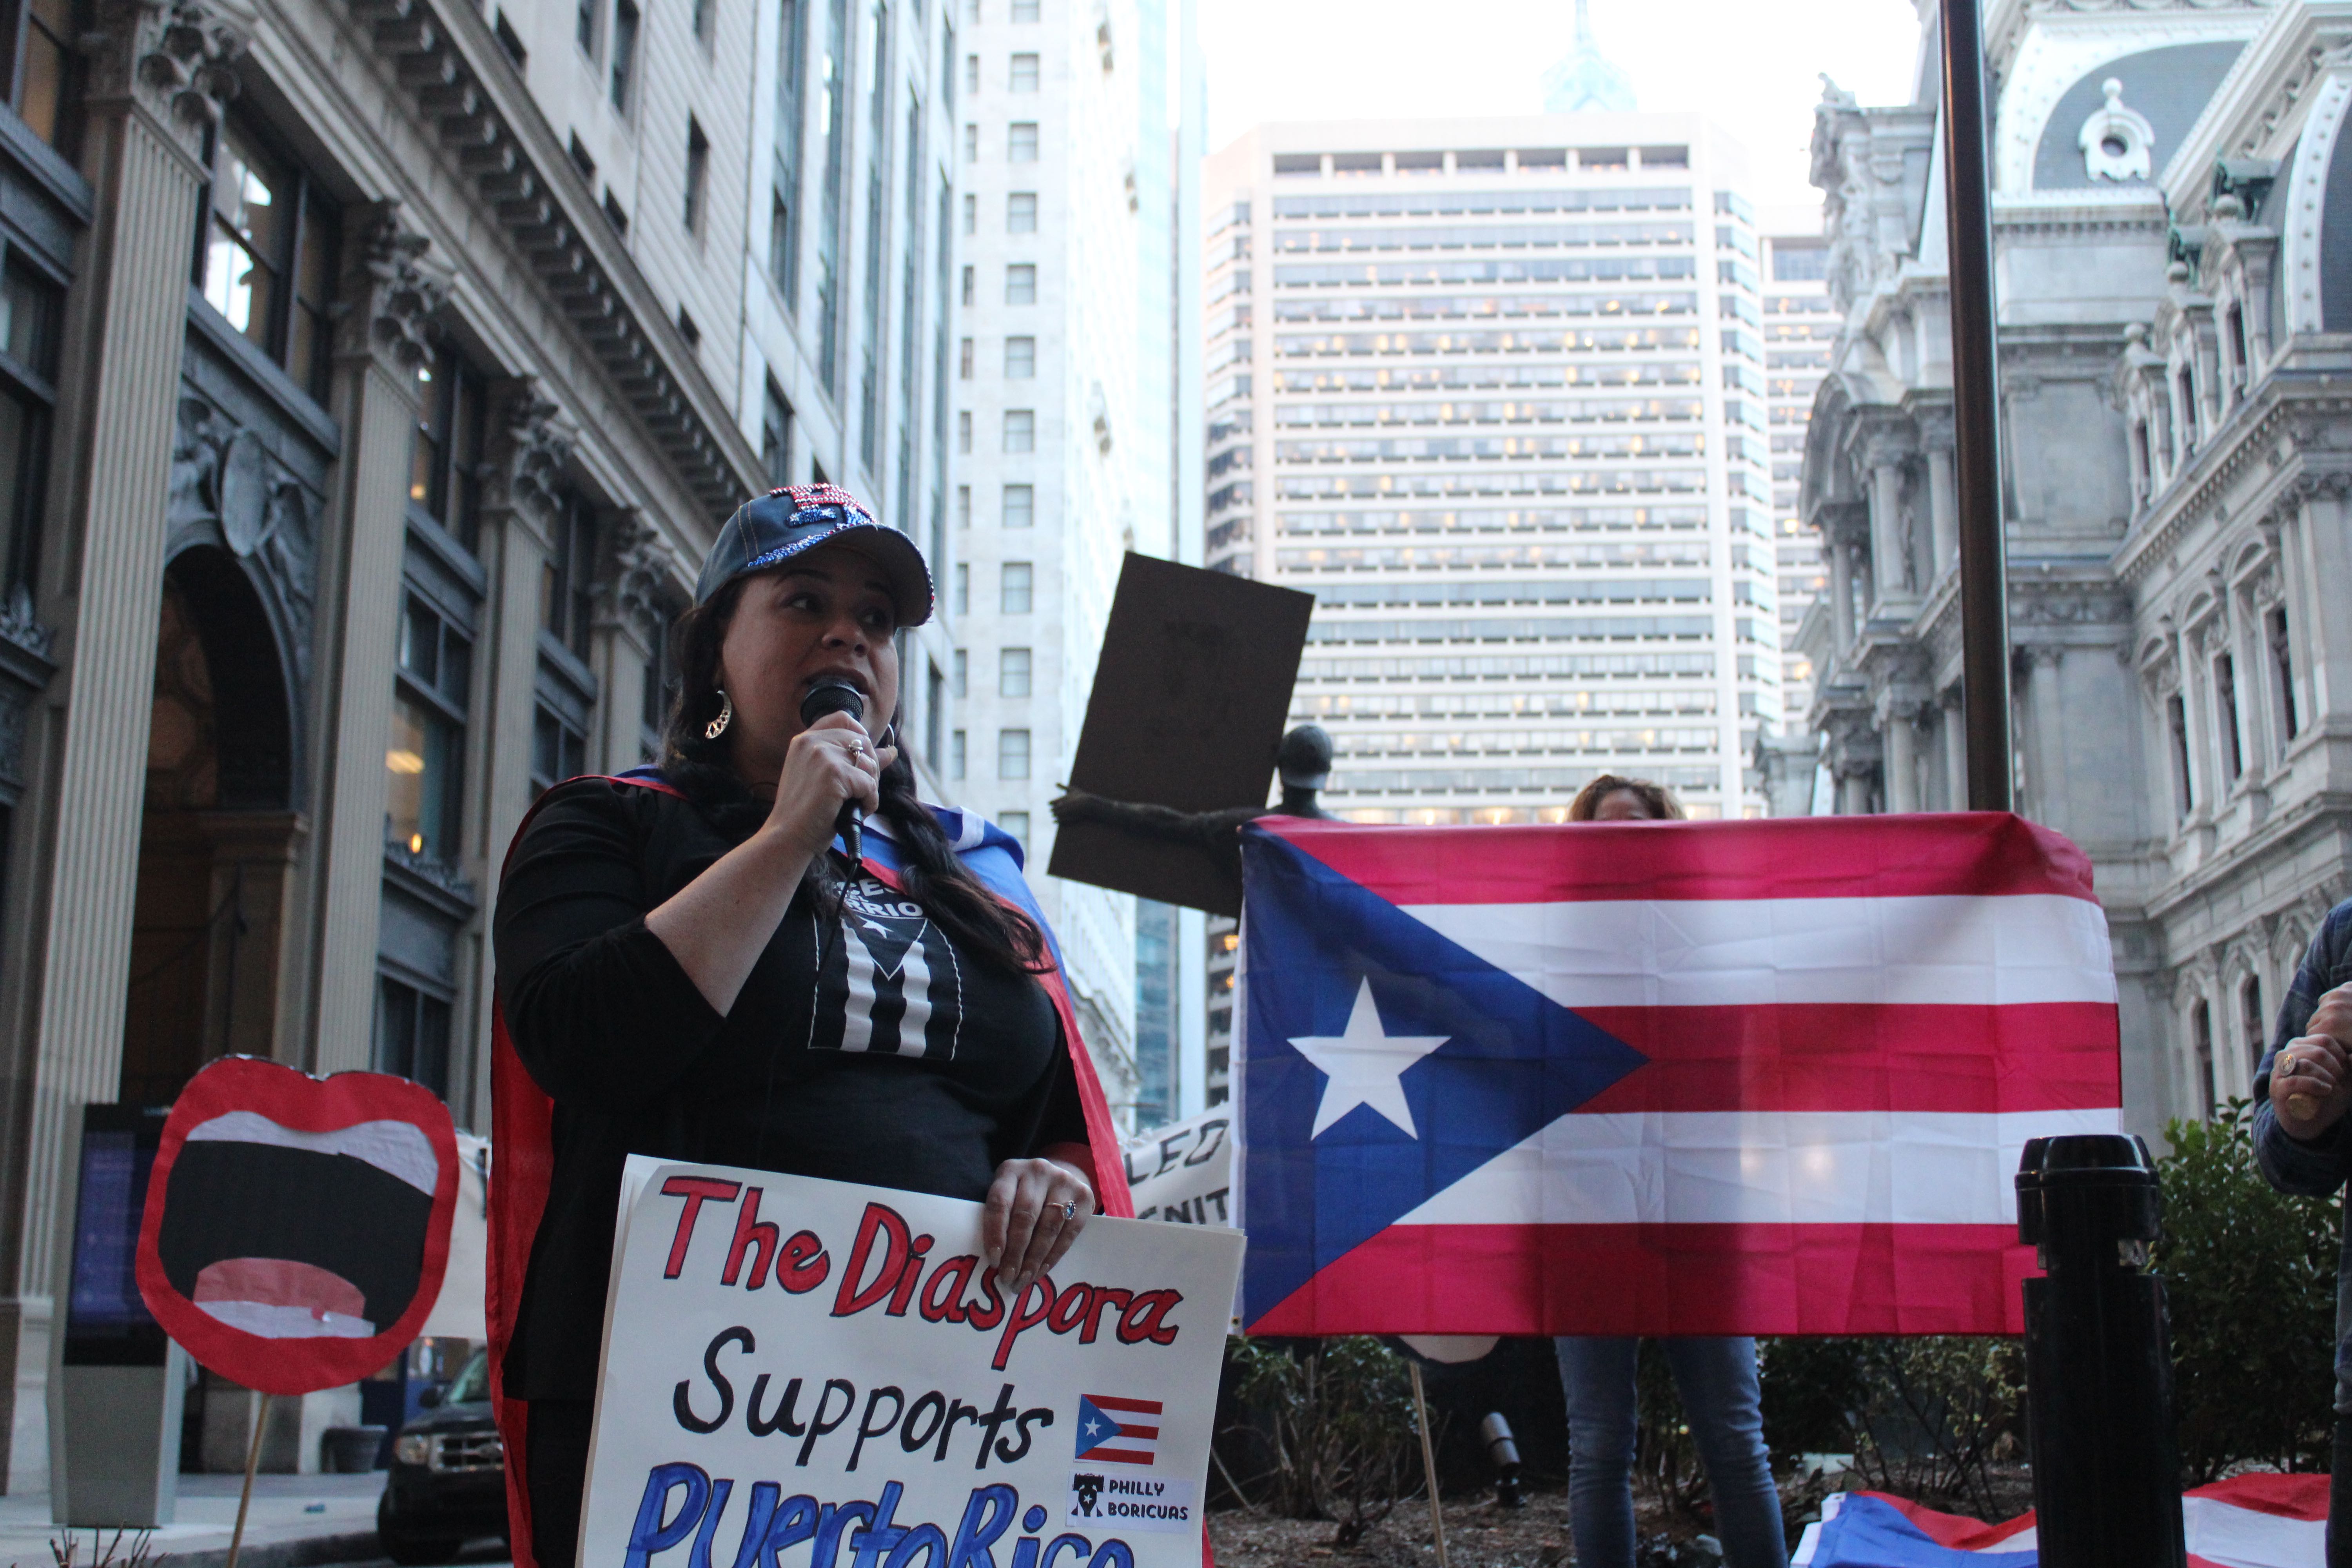 Vanessa Maria Graber, demonstrator and Philly Boricuas organizer, spoke at the Power 4 Puerto Rico protest in Philadelphia on Jan. 15. Protesters gathered outside of the Department of Urban Housing and Development offices in Center City, Philadelphia, demanding that HUD release the more than $10 billion in aid allocated to Puerto Rico after Hurricanes María and Irma. Photo: Emily Neil / AL DÍA News